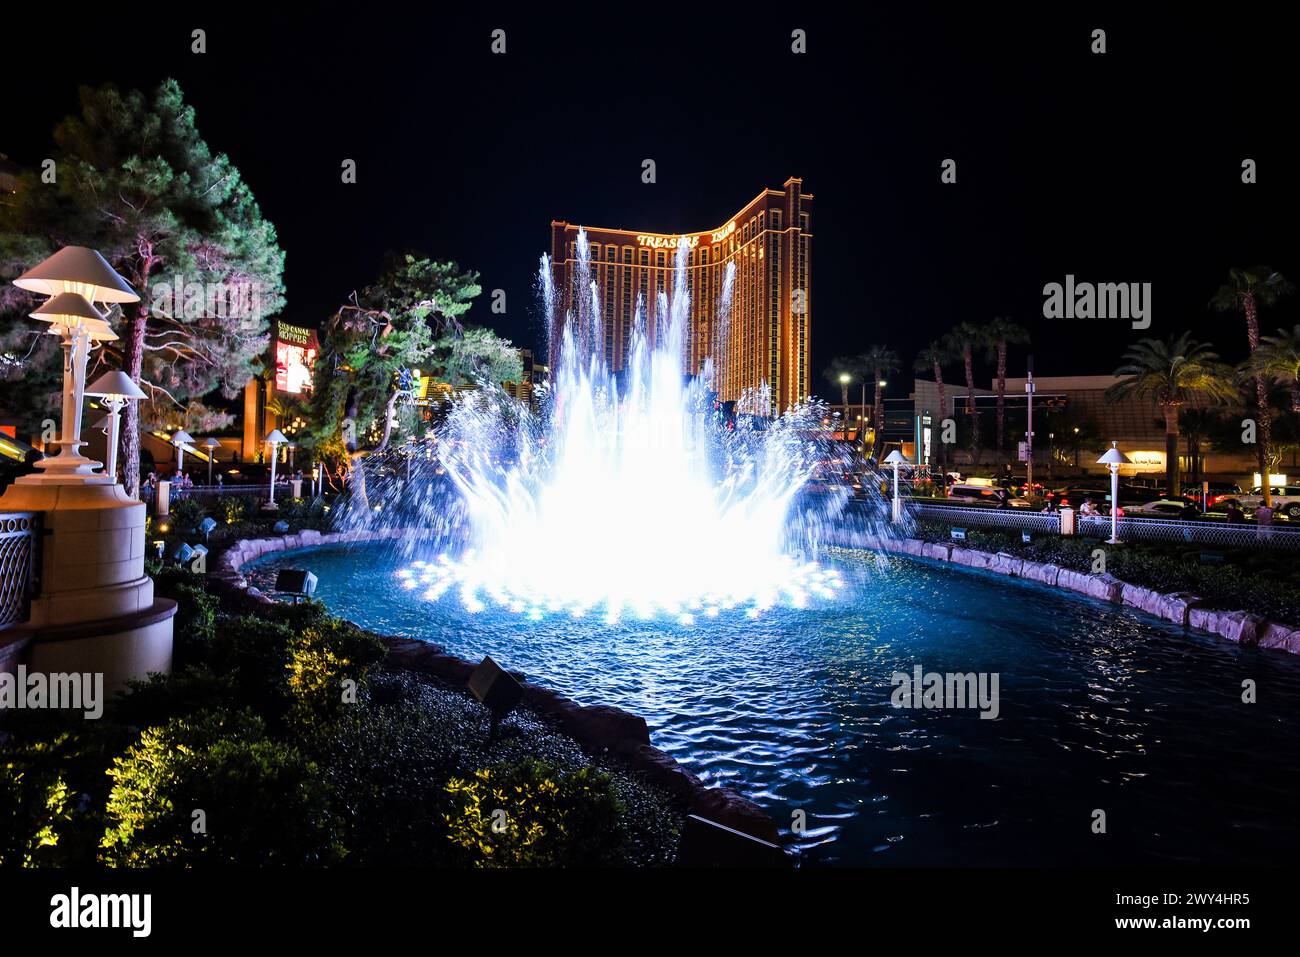 The Wynn Fountain Show with the Treasure Island Hotel in the Background - Las Vegas, Nevada Stock Photo